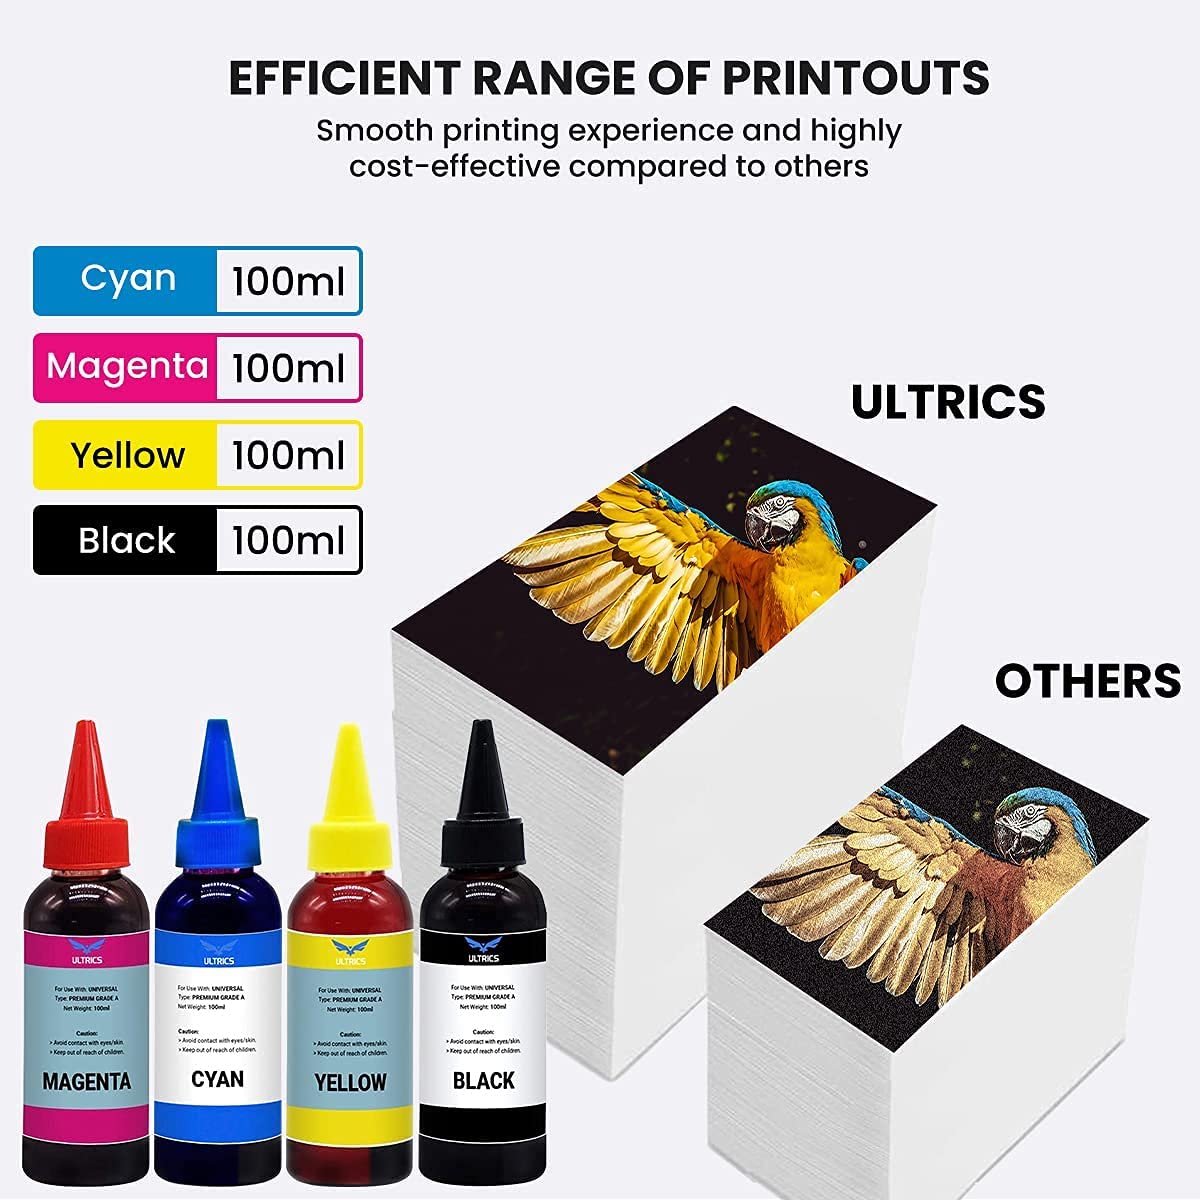 ULTRICS Printer Refill Ink, 4 X 100ml Universal Bulk Refillable Ink Kit for CISS System Compatible with Epson, Canon, Brother, Dell, HP, Lexmark, Kodak, Samsung, Xerox - Black Cyan Magenta Yellow